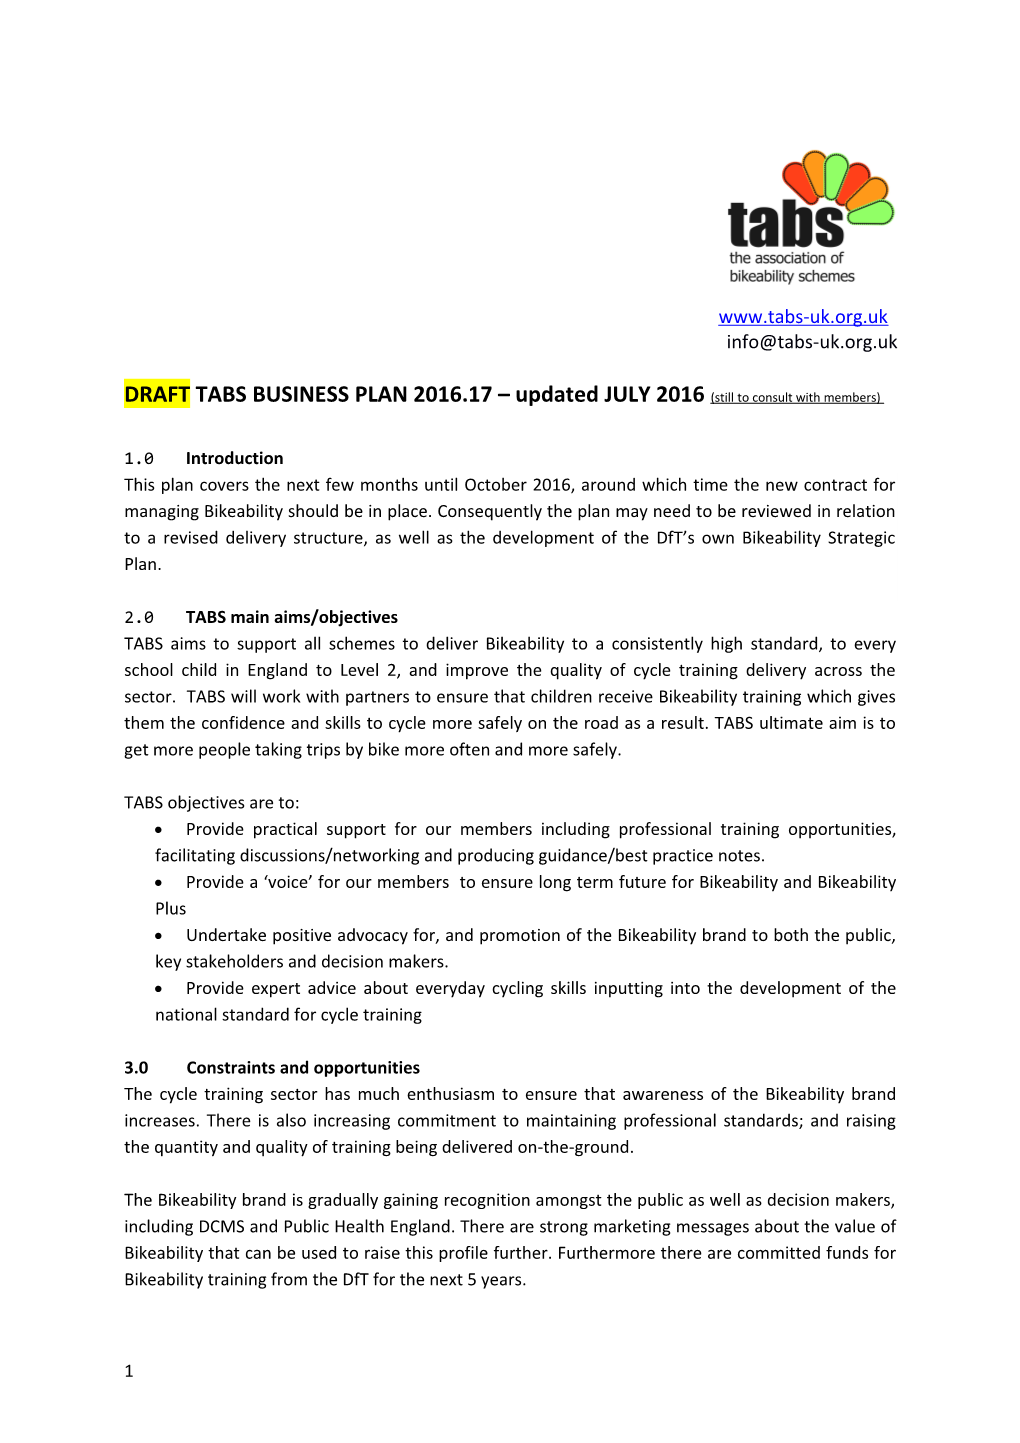 DRAFT TABS BUSINESS PLAN 2016.17 Updated JULY 2016 (Still to Consult with Members)